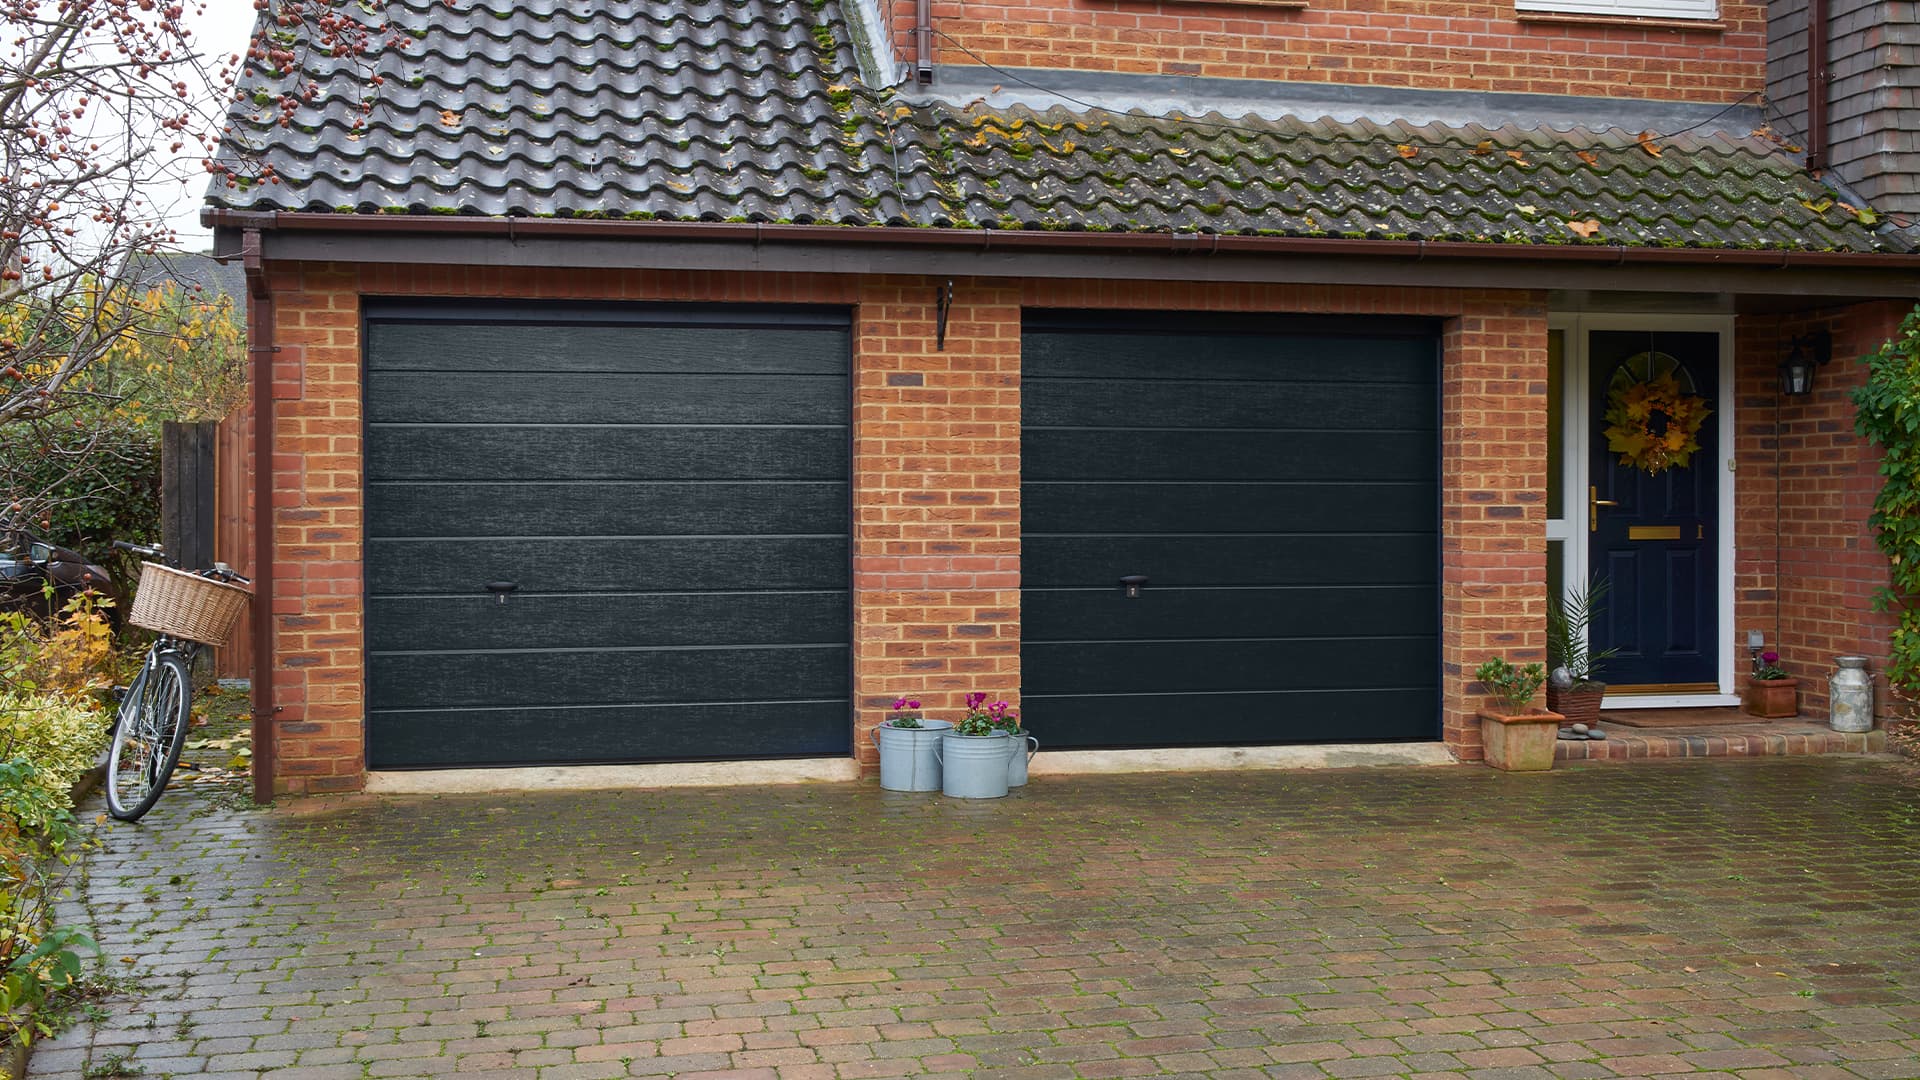 5 Things to Look for When Choosing a Garage Door Company